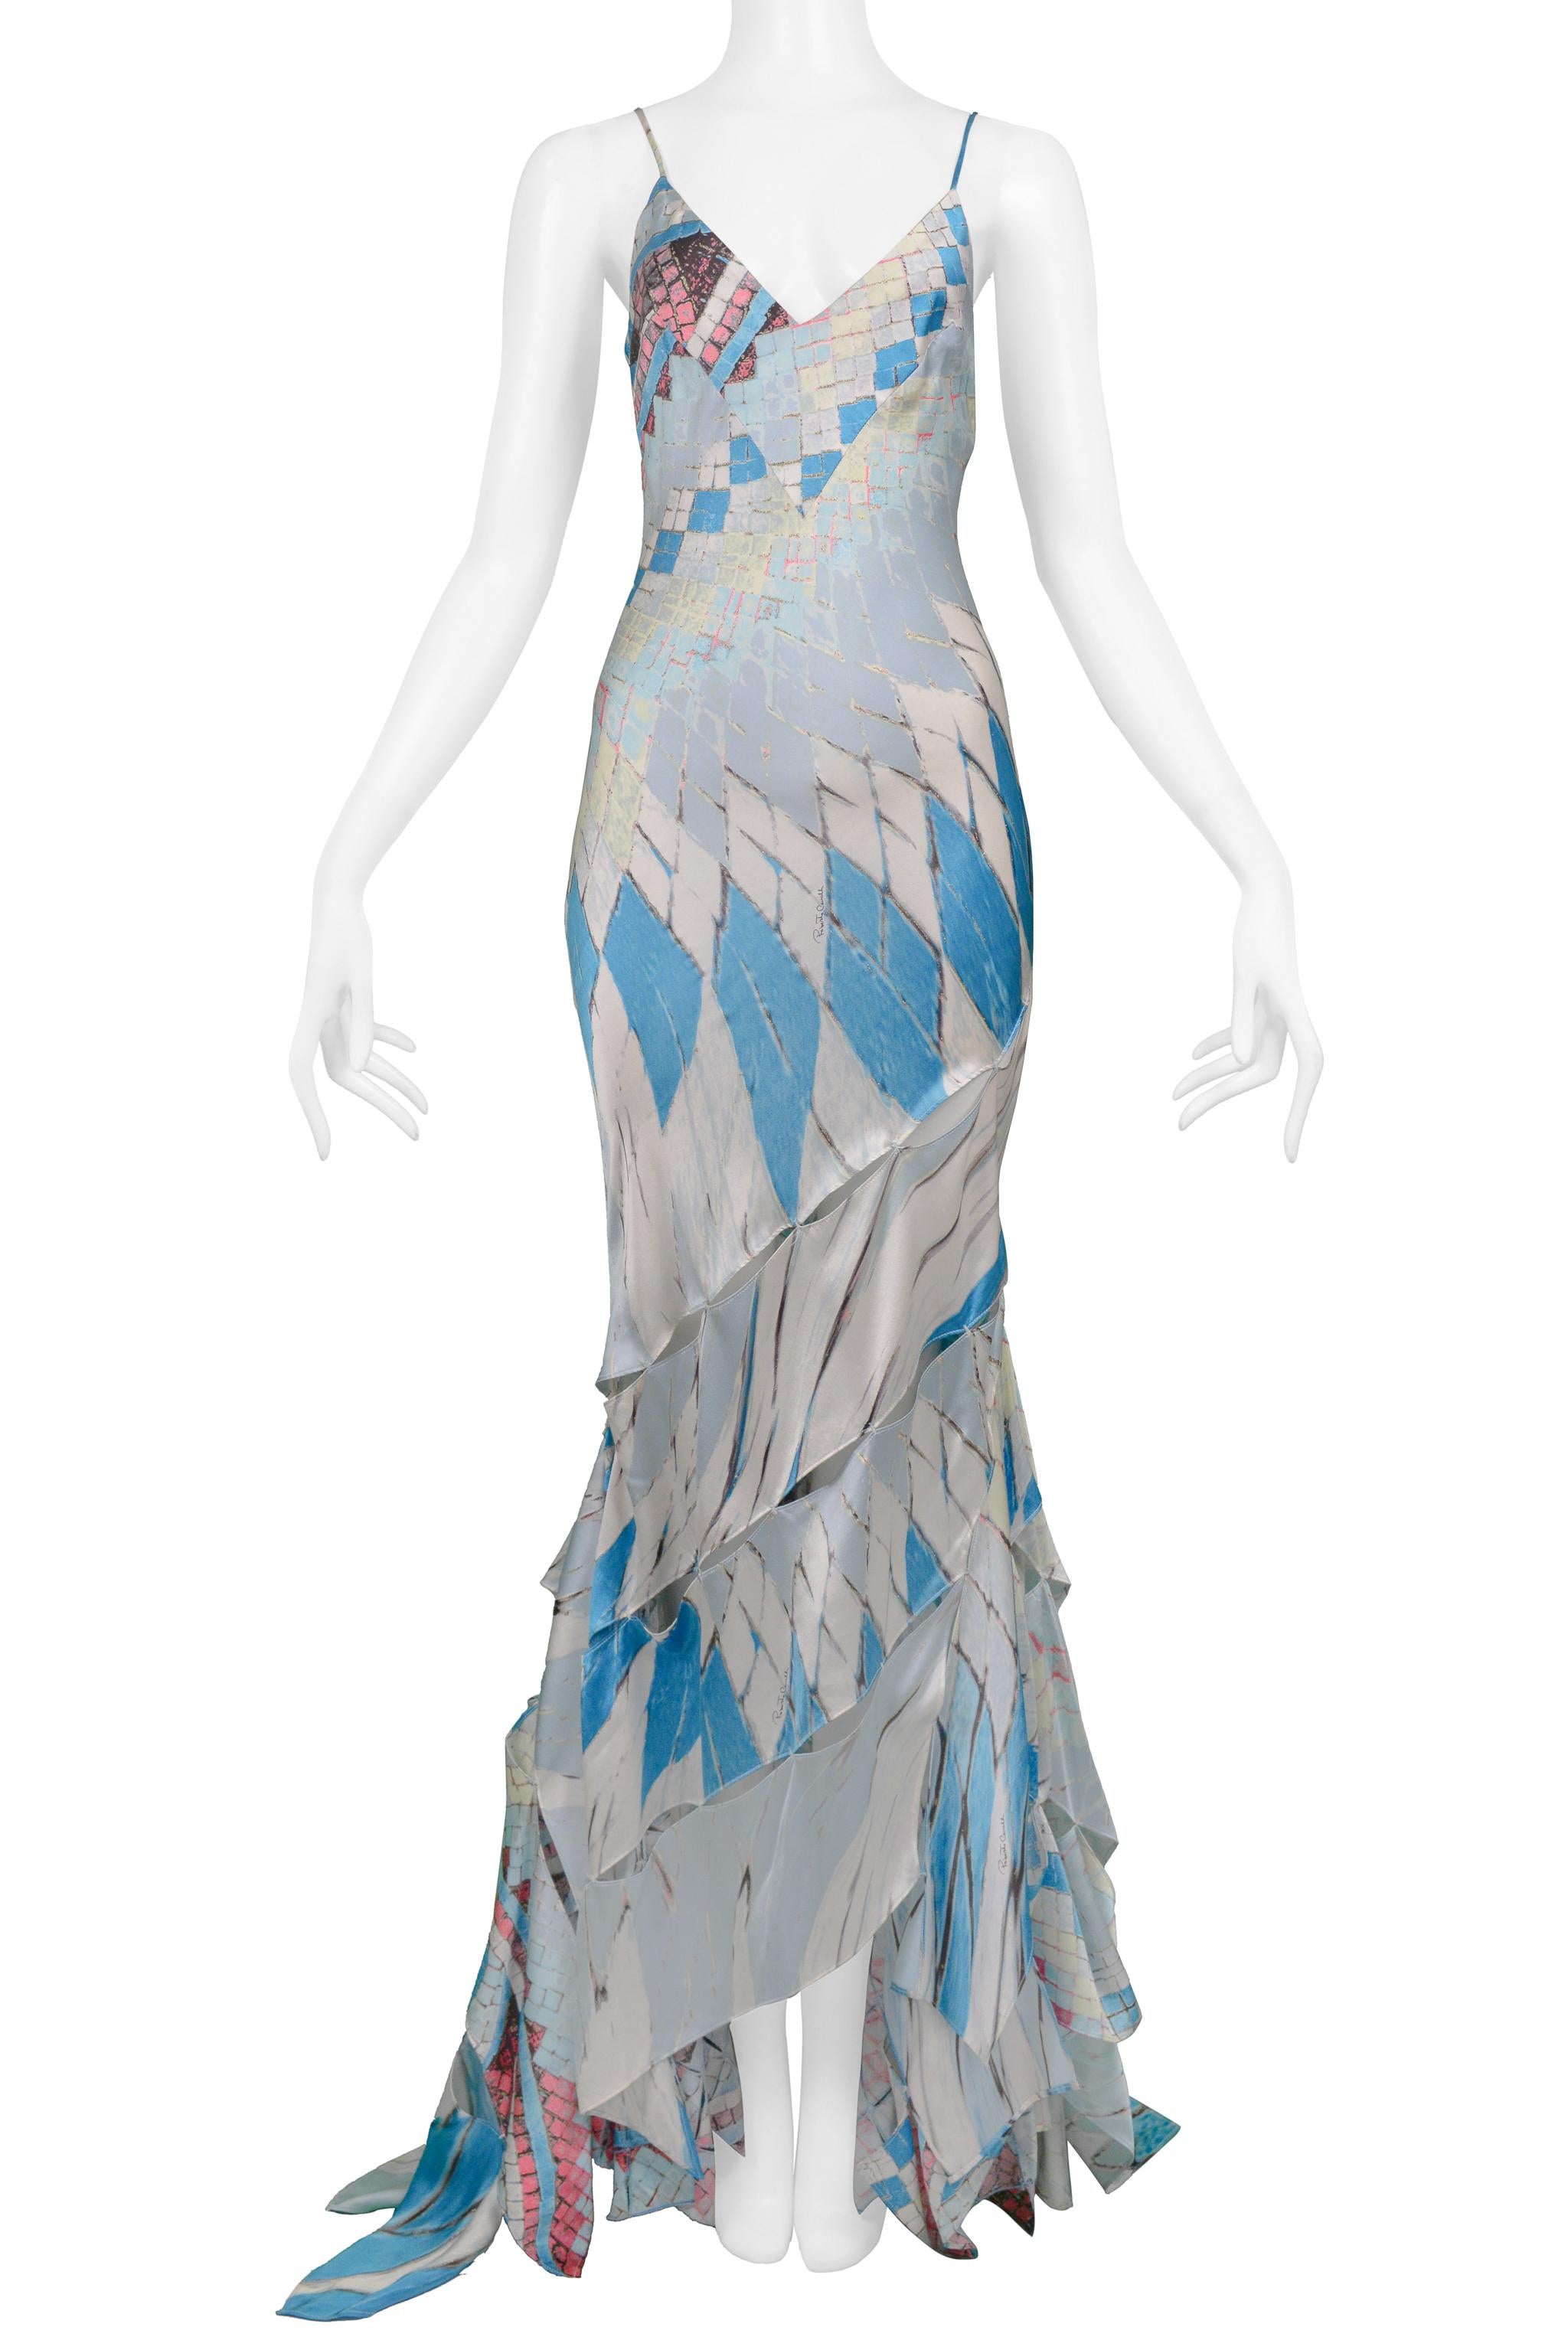 Gray Roberto Cavalli Multicolor Stained Glass Print Gown With Cutout Slashes 2004 For Sale